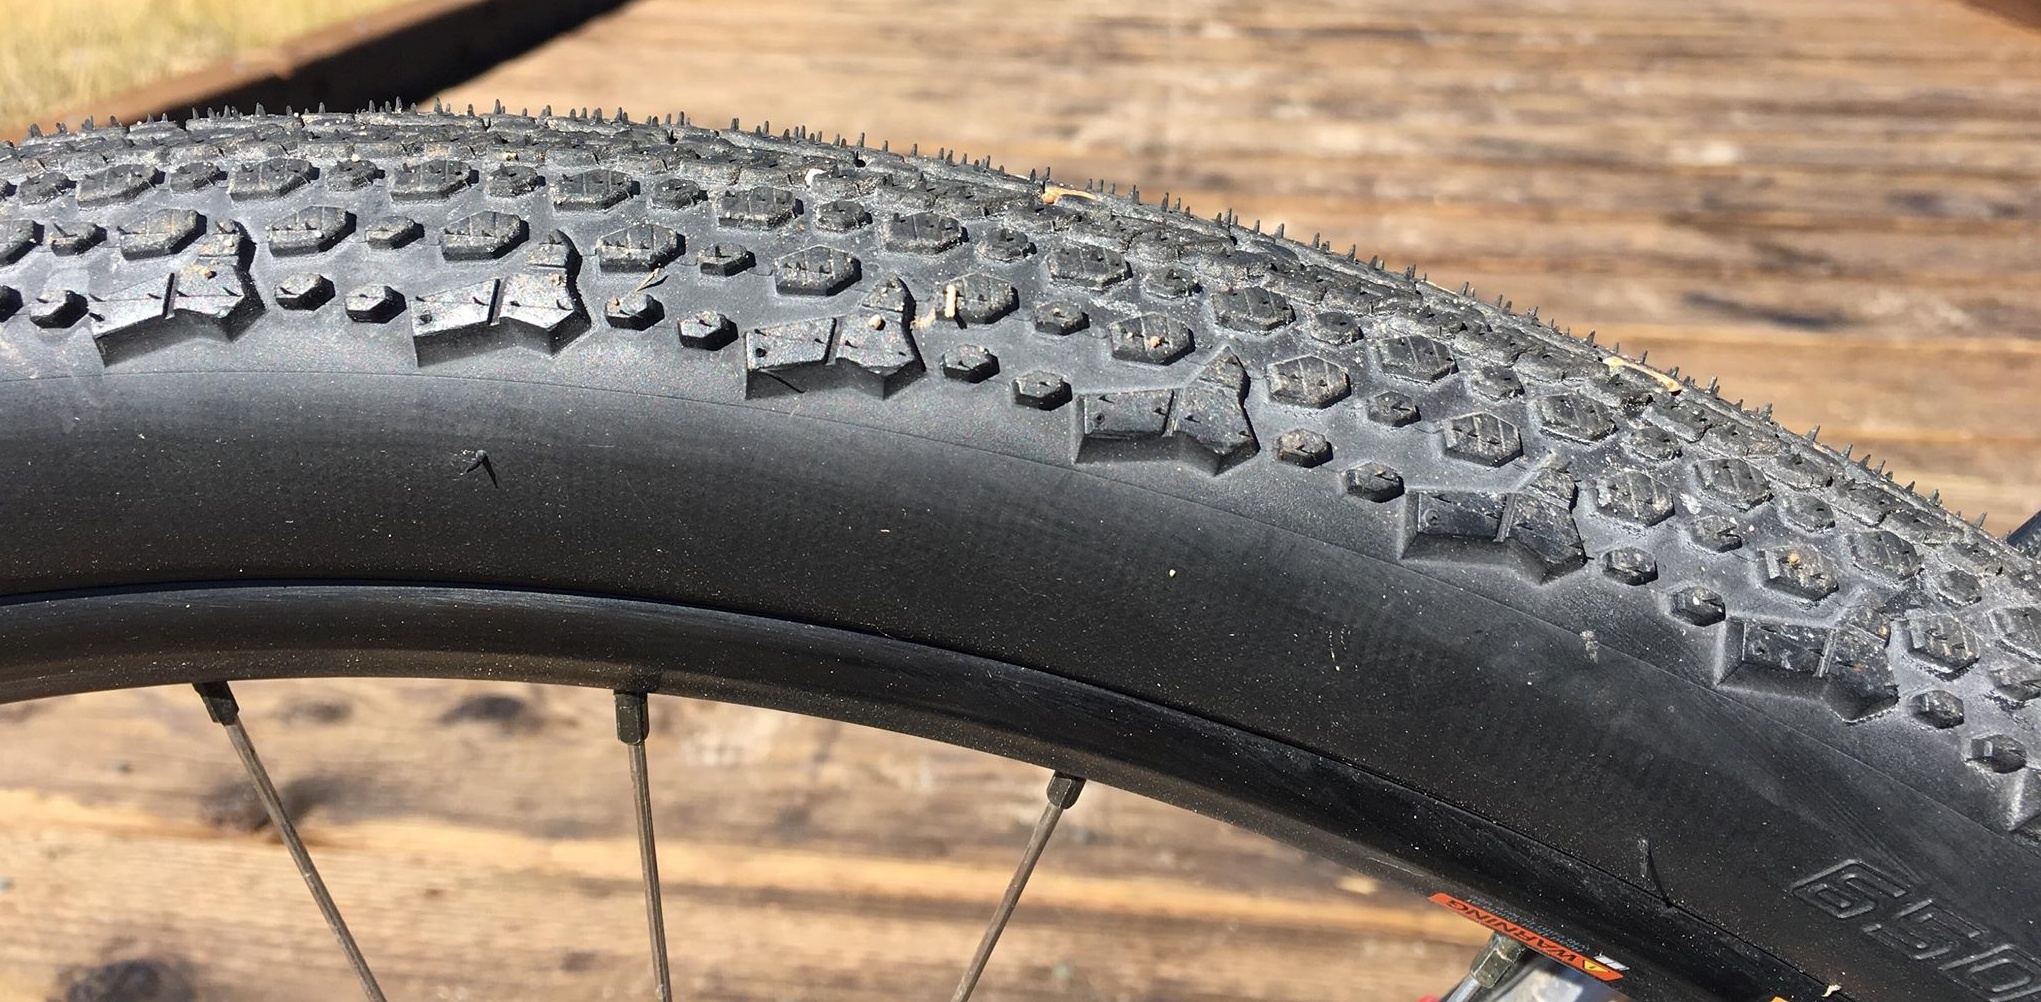 Reaktor Pounding løst Donnelly MSO 650B x 50mm Tires: Getting Rolling - Riding Gravel